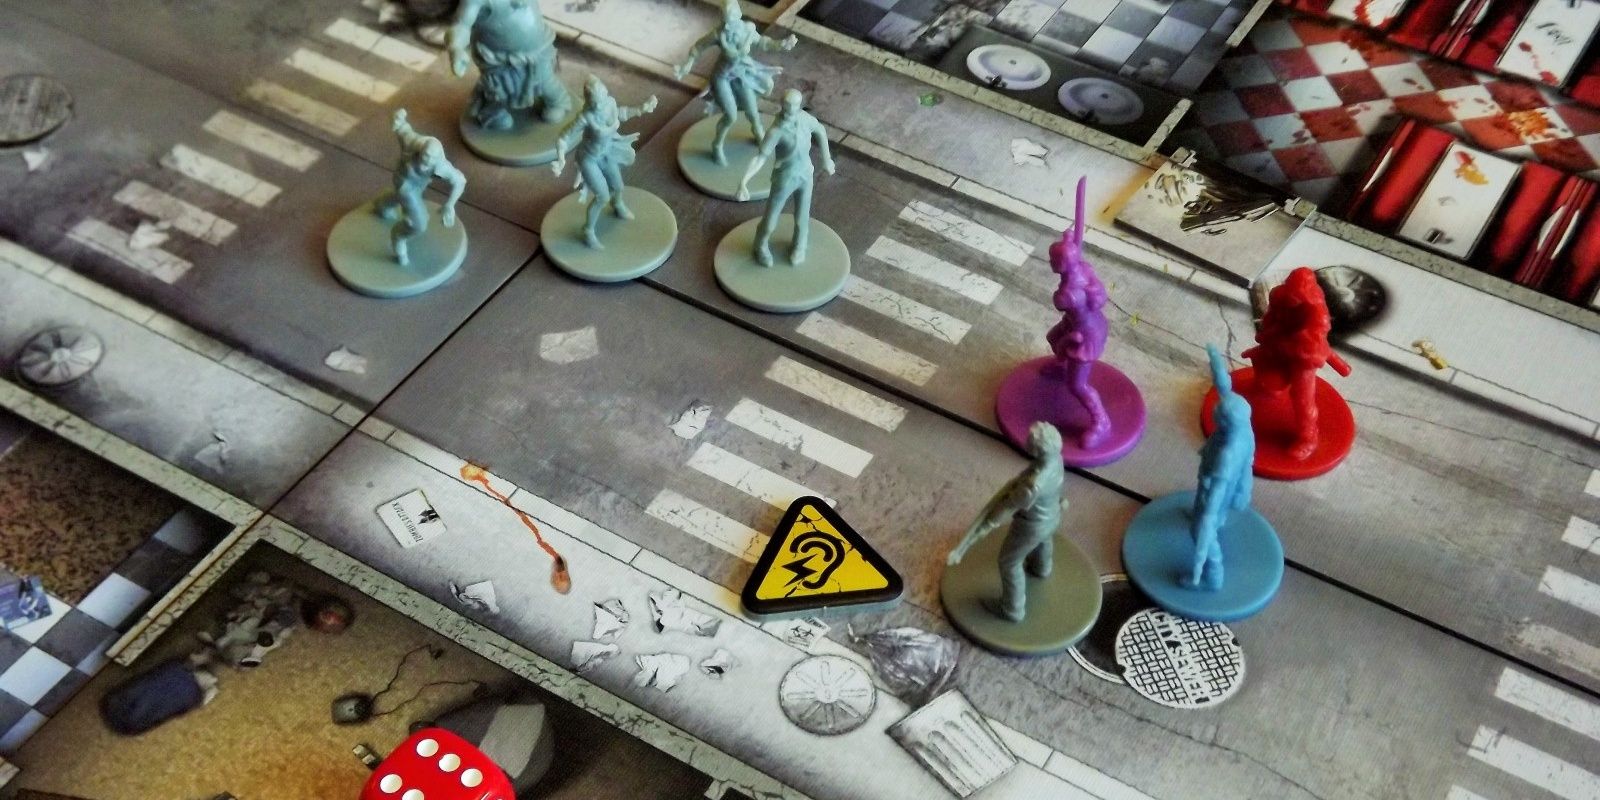 Zombicide board game being played on a table.